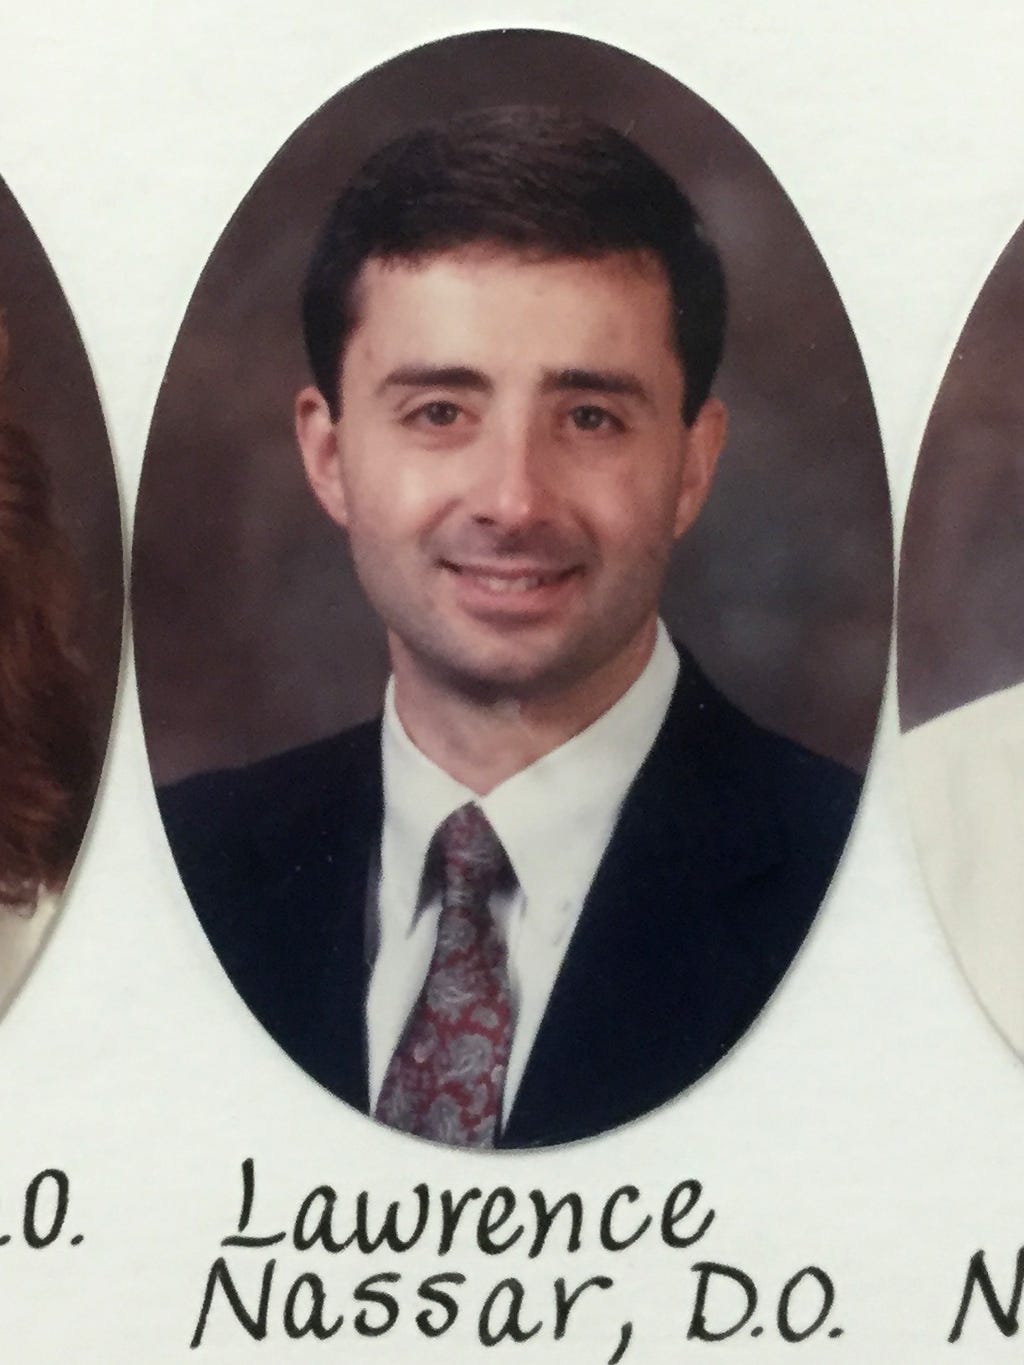 Lawrence (Larry) Nassar's photo appears in the 1993 composite of the Michigan State University College of Osteopathic Medicine.